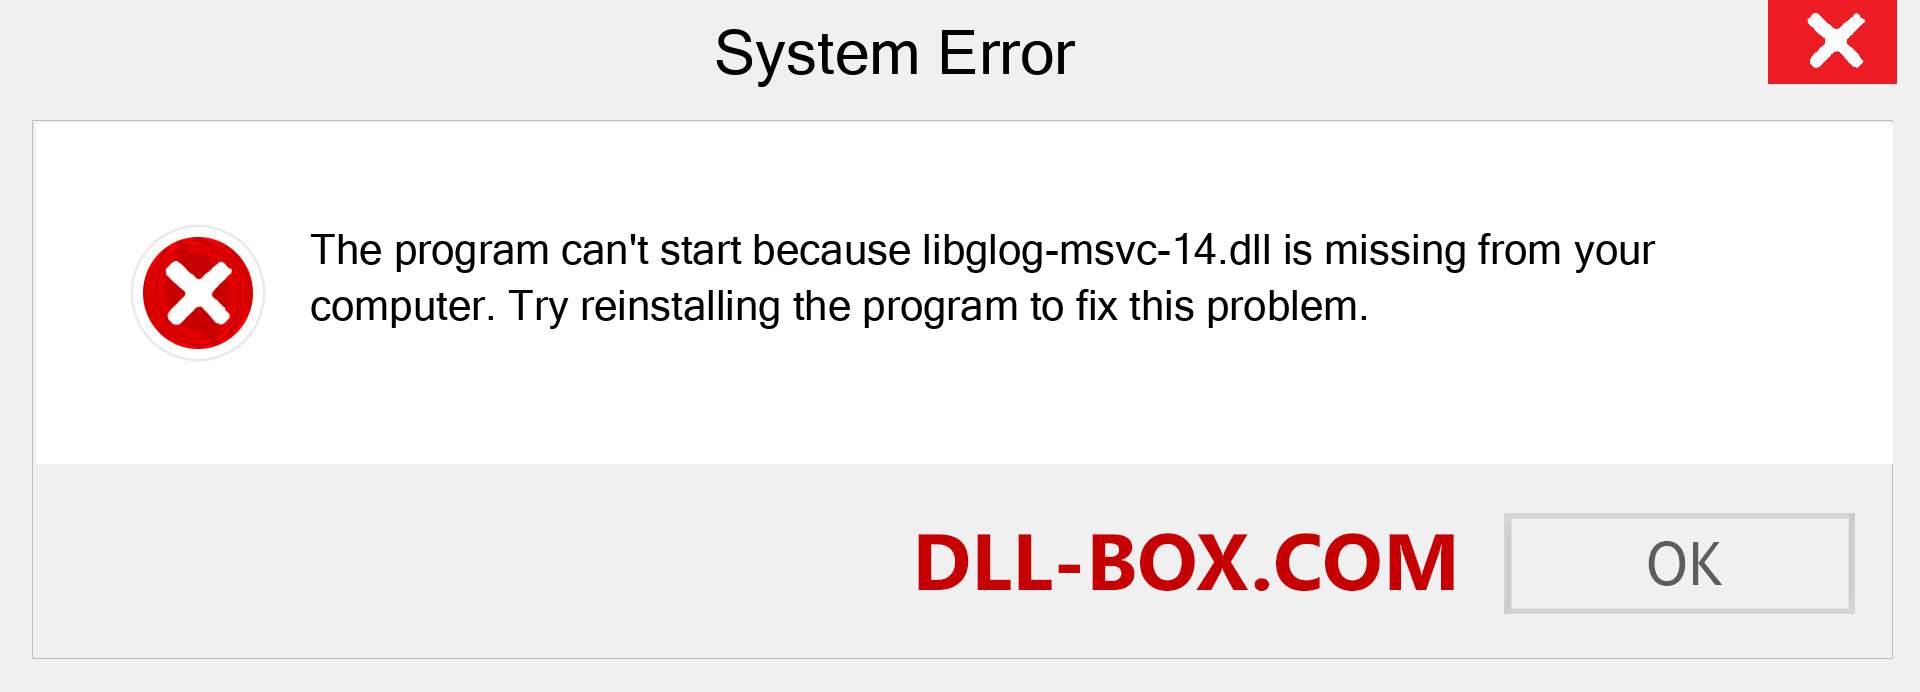  libglog-msvc-14.dll file is missing?. Download for Windows 7, 8, 10 - Fix  libglog-msvc-14 dll Missing Error on Windows, photos, images